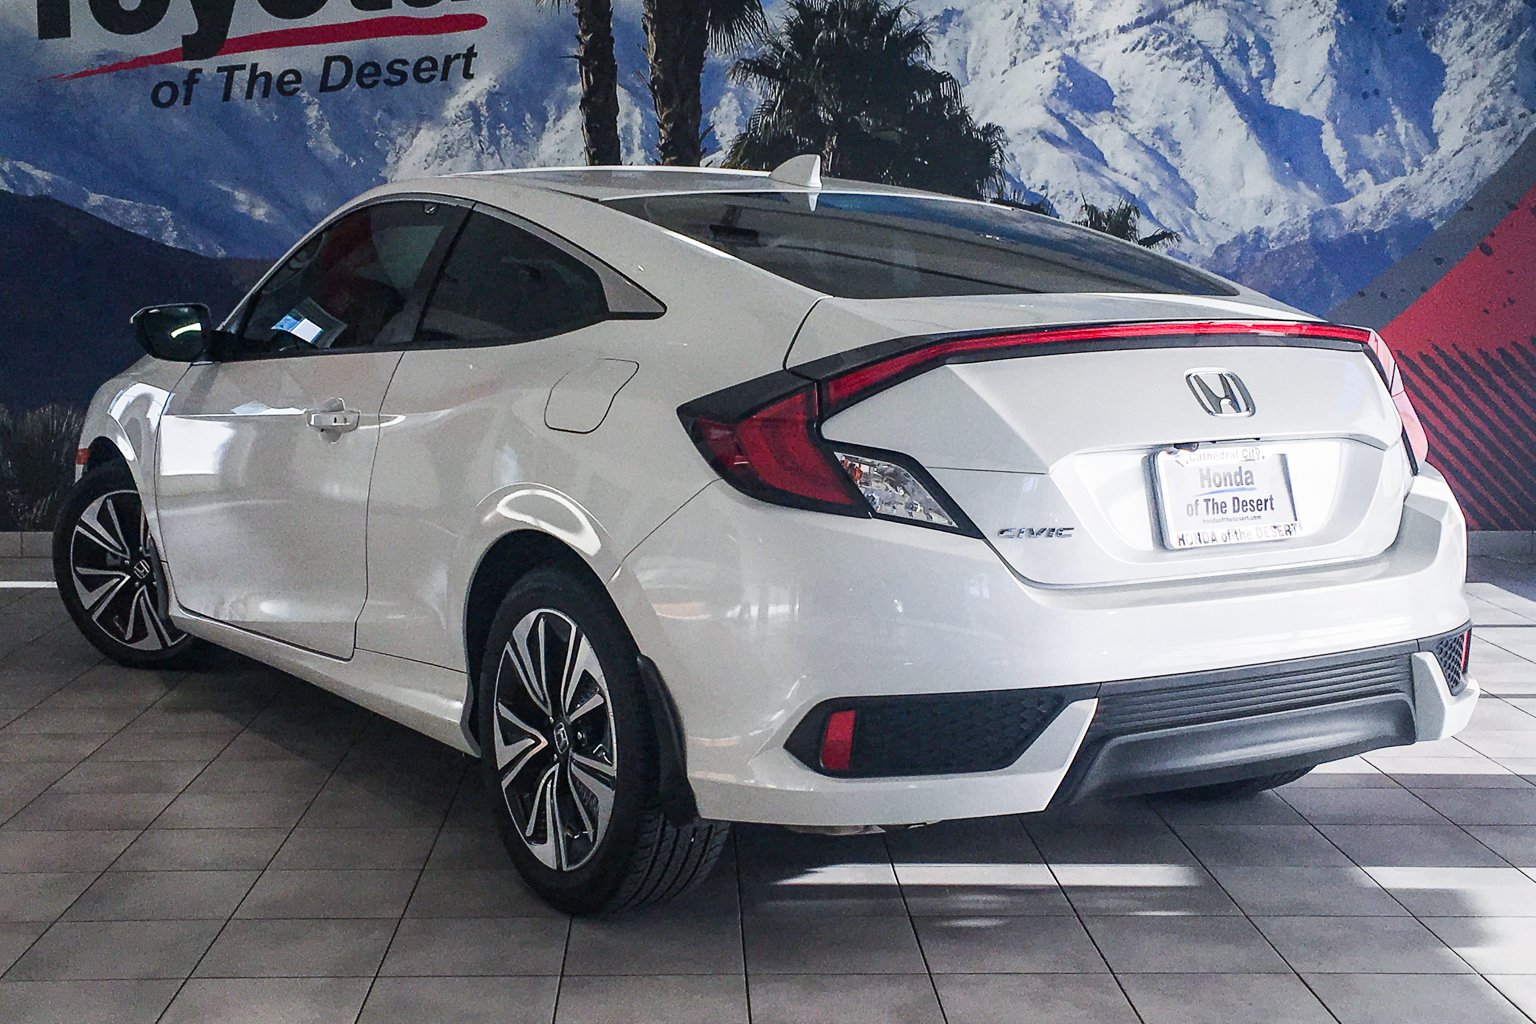 PreOwned 2017 Honda Civic Coupe EXT 2dr Car in Cathedral